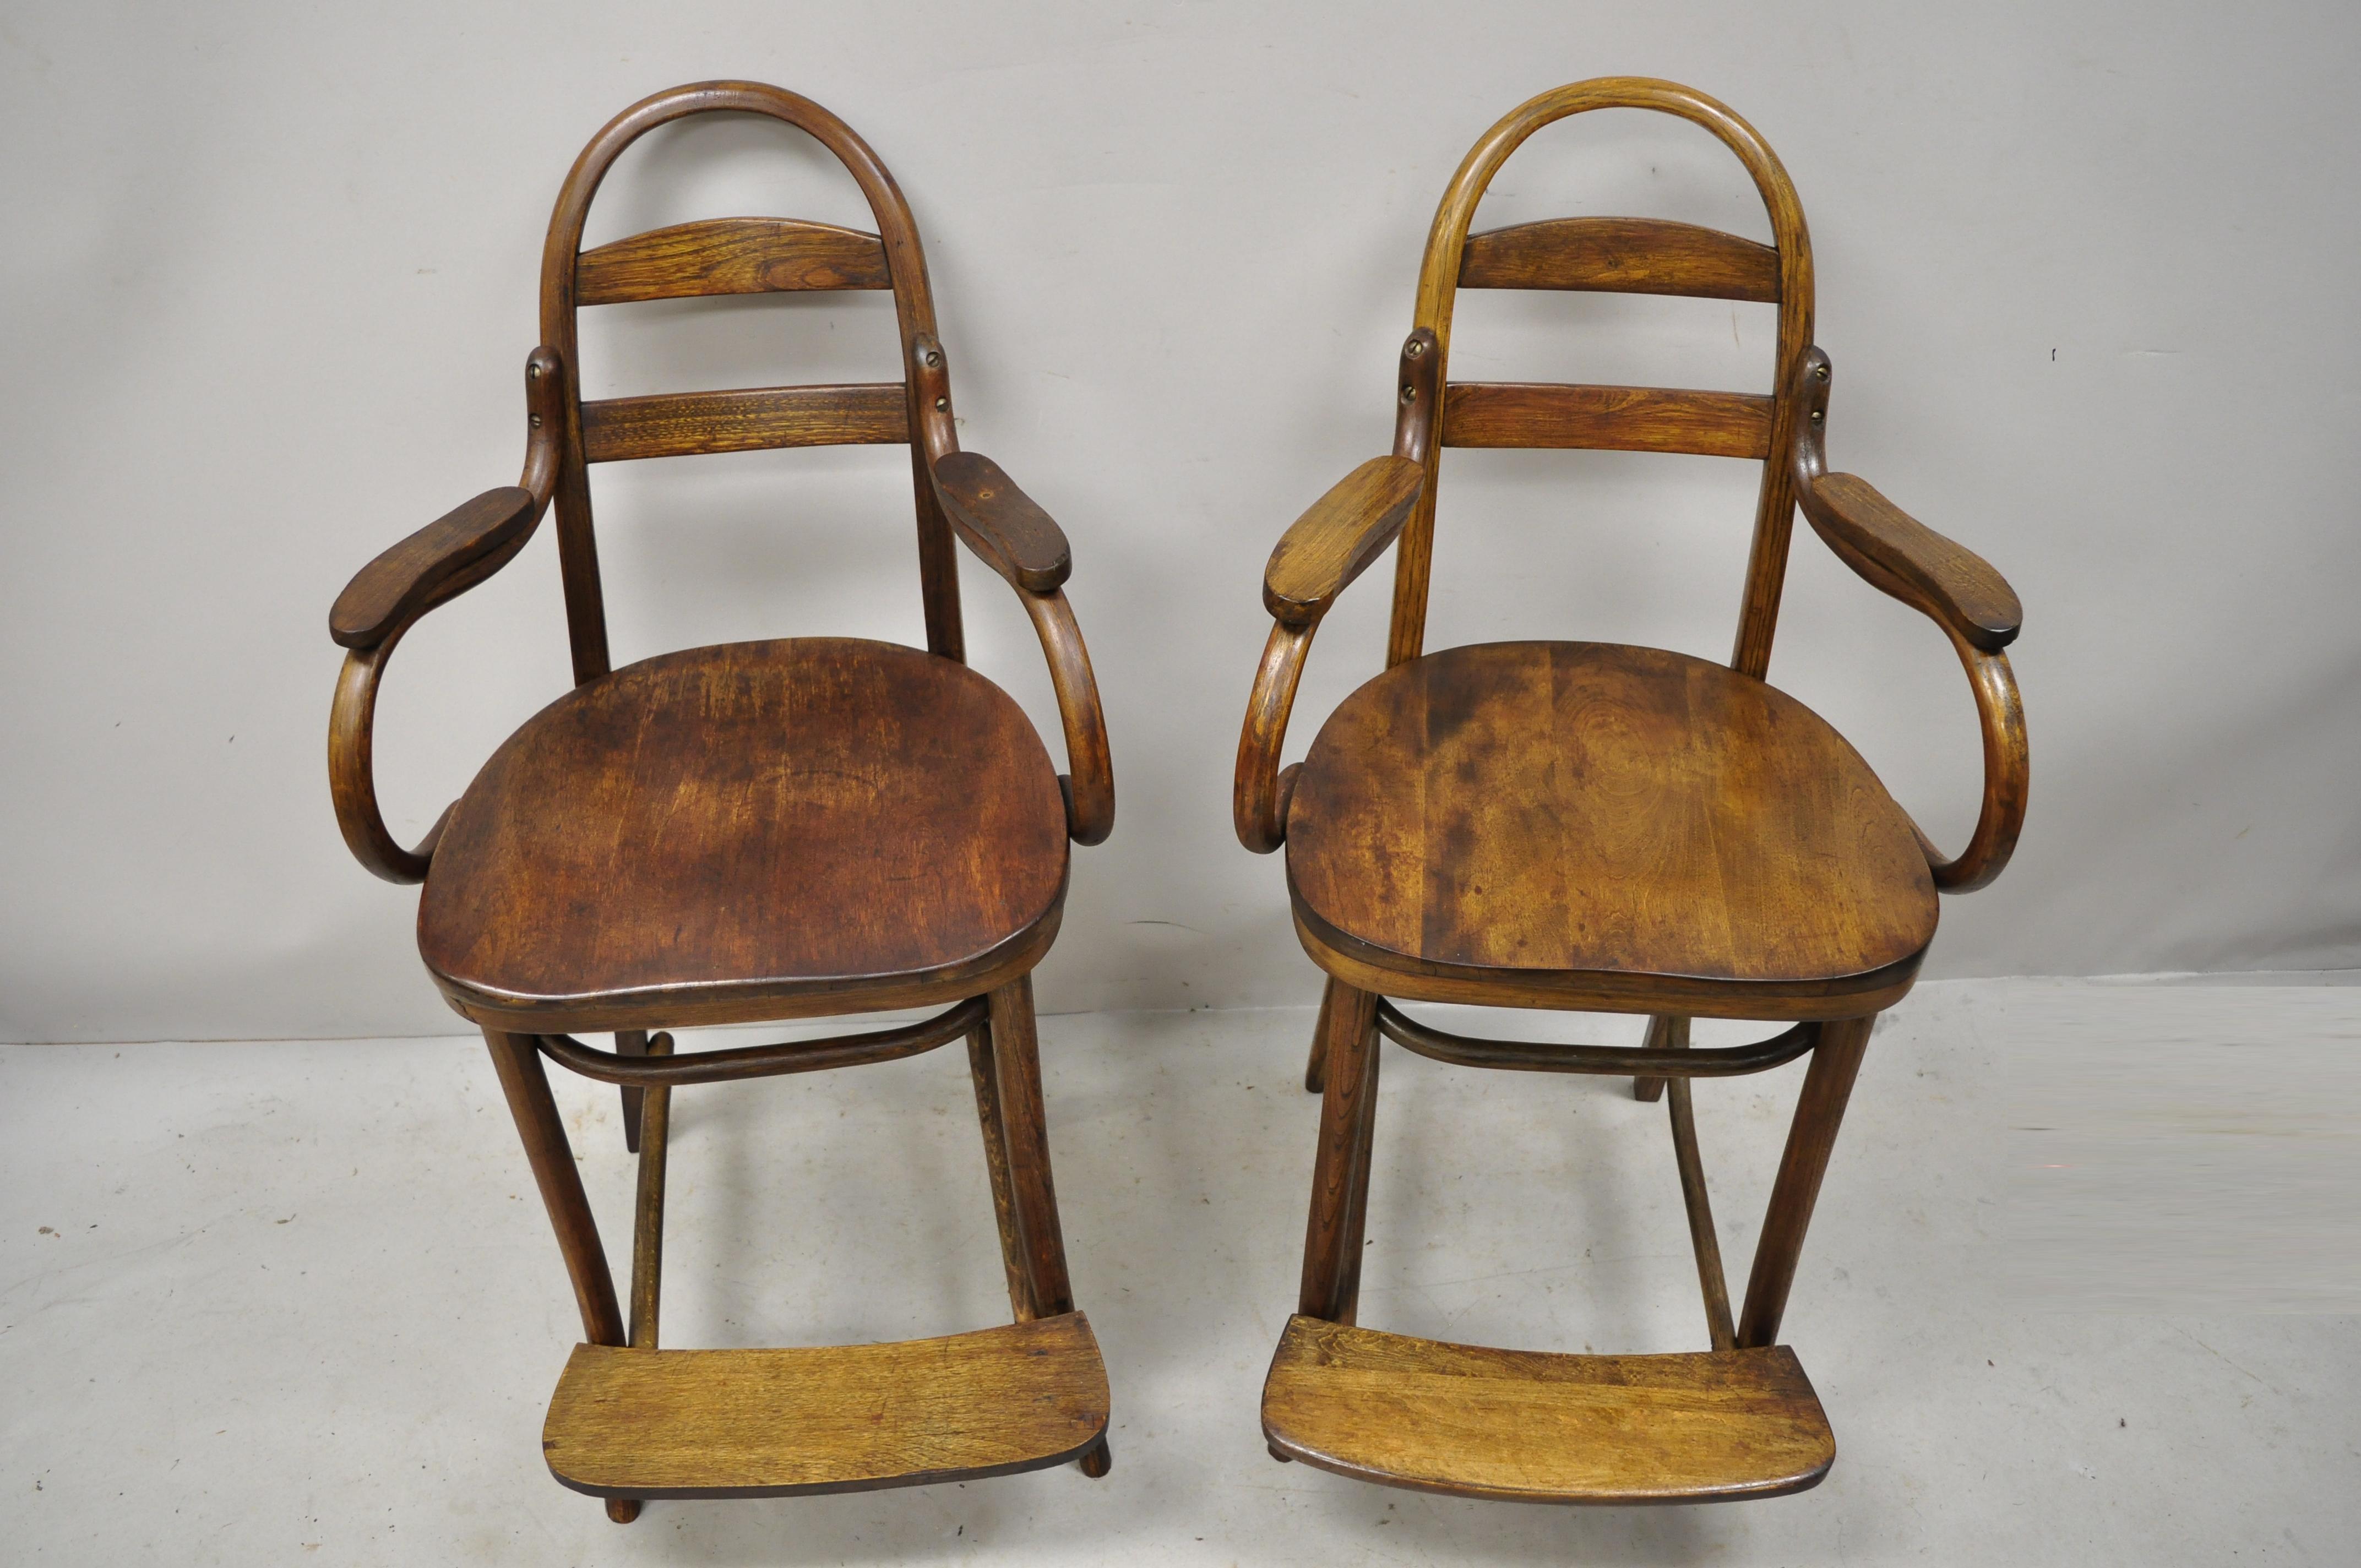 Antique Art Nouveau Thonet style Austrian bentwood counter stool chairs, a pair (Slight variation in stretcher bases and armrests). Item features bentwood frames, slat backs, footrests, very nice antique item. Slight variation in stretcher bases and